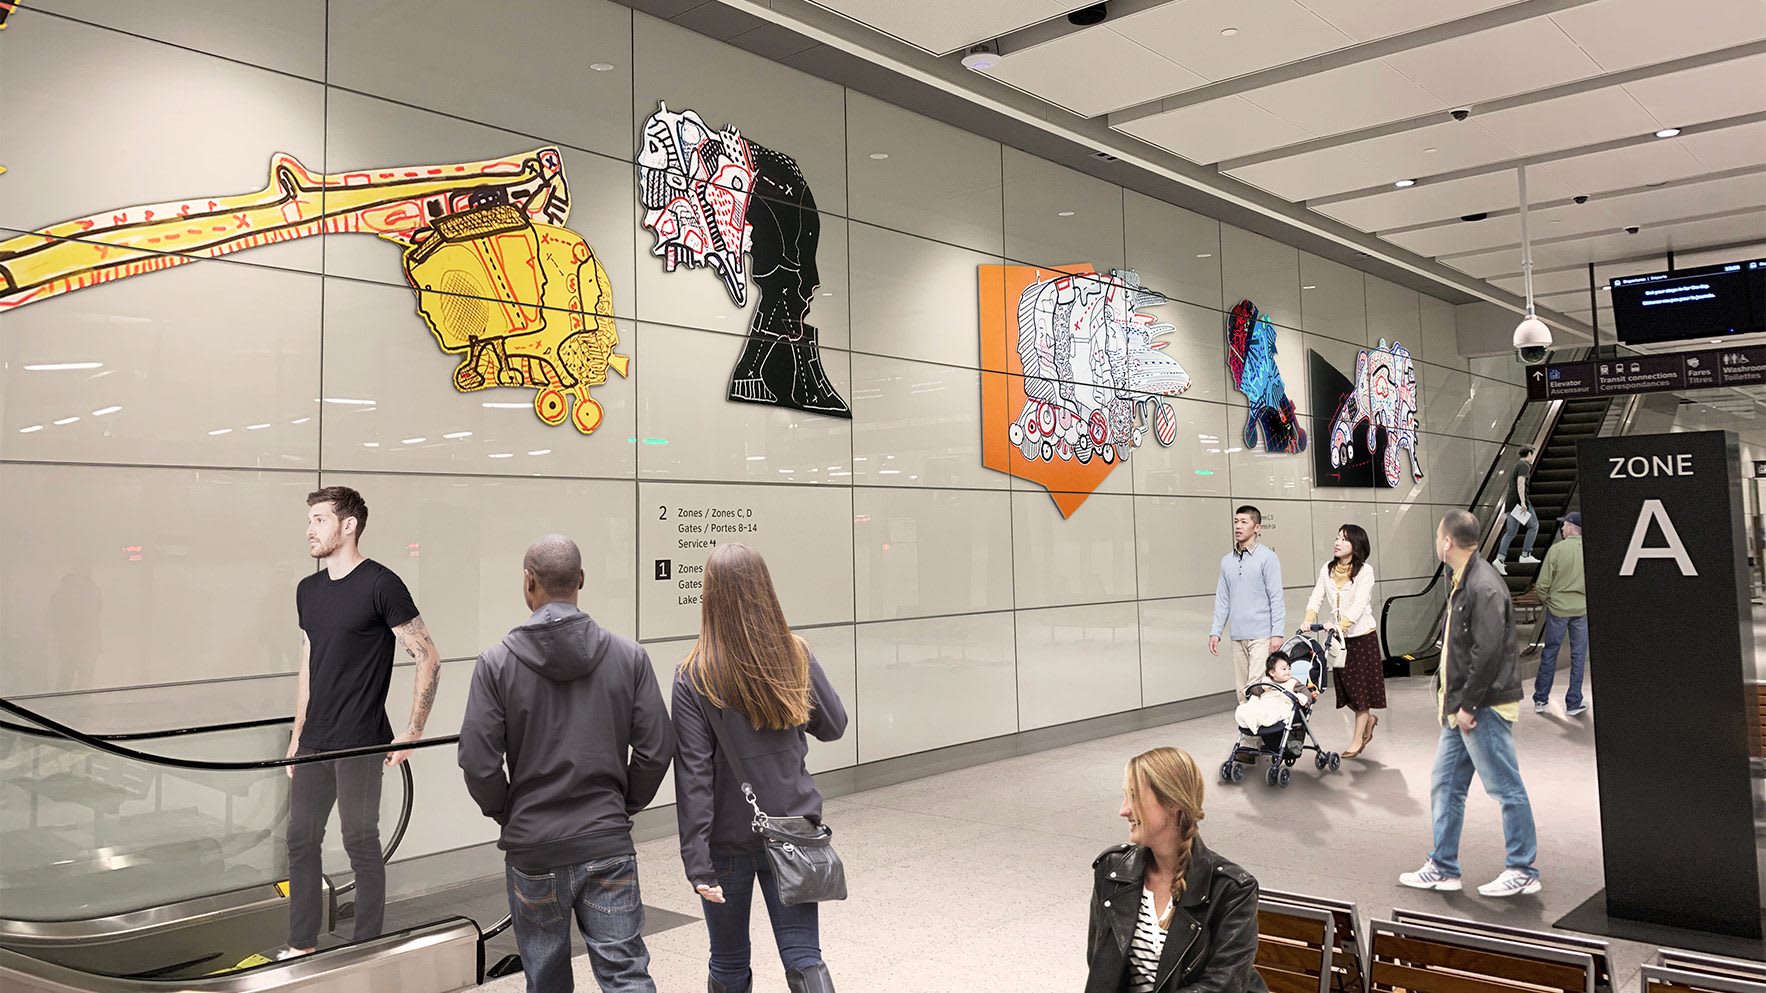 New artwork aims to further transform Union Station Bus Terminal in Toronto